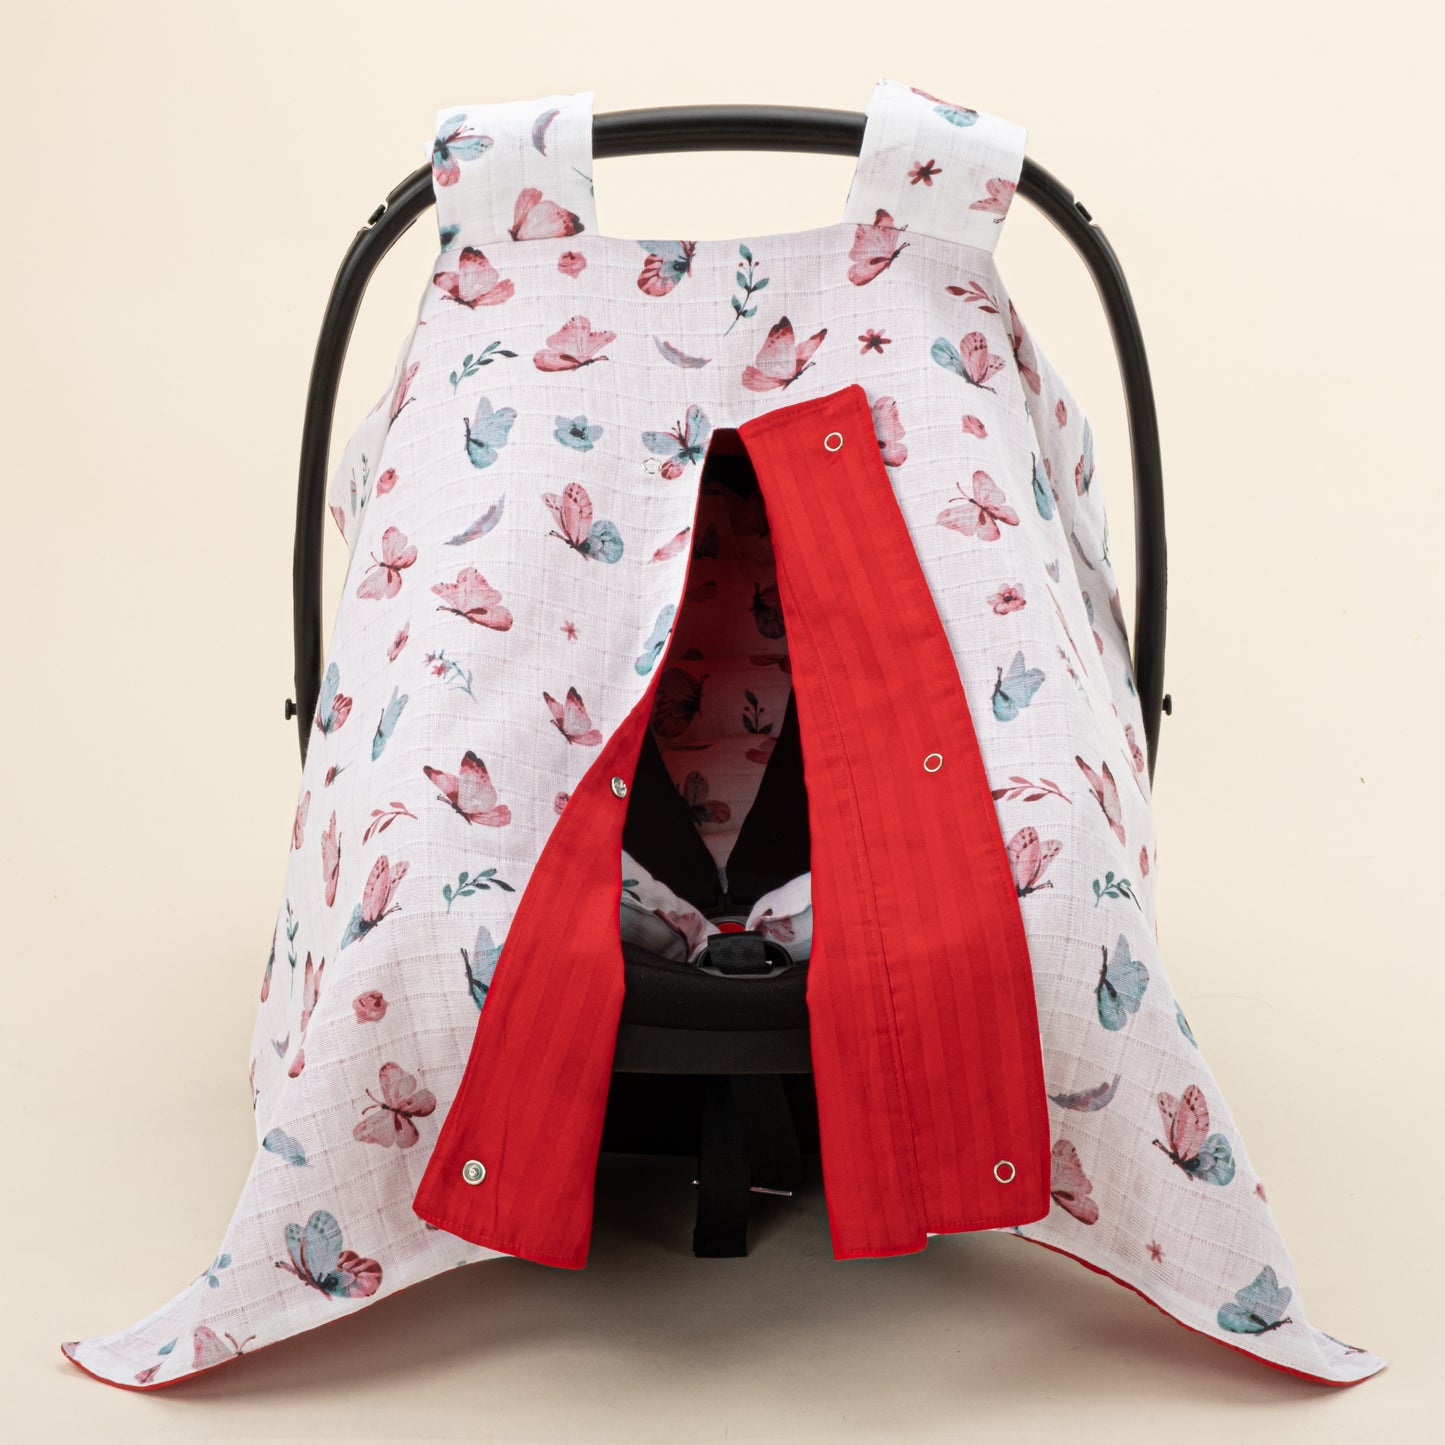 Stroller Cover Set - Double Side - Red Satin - Butterfly